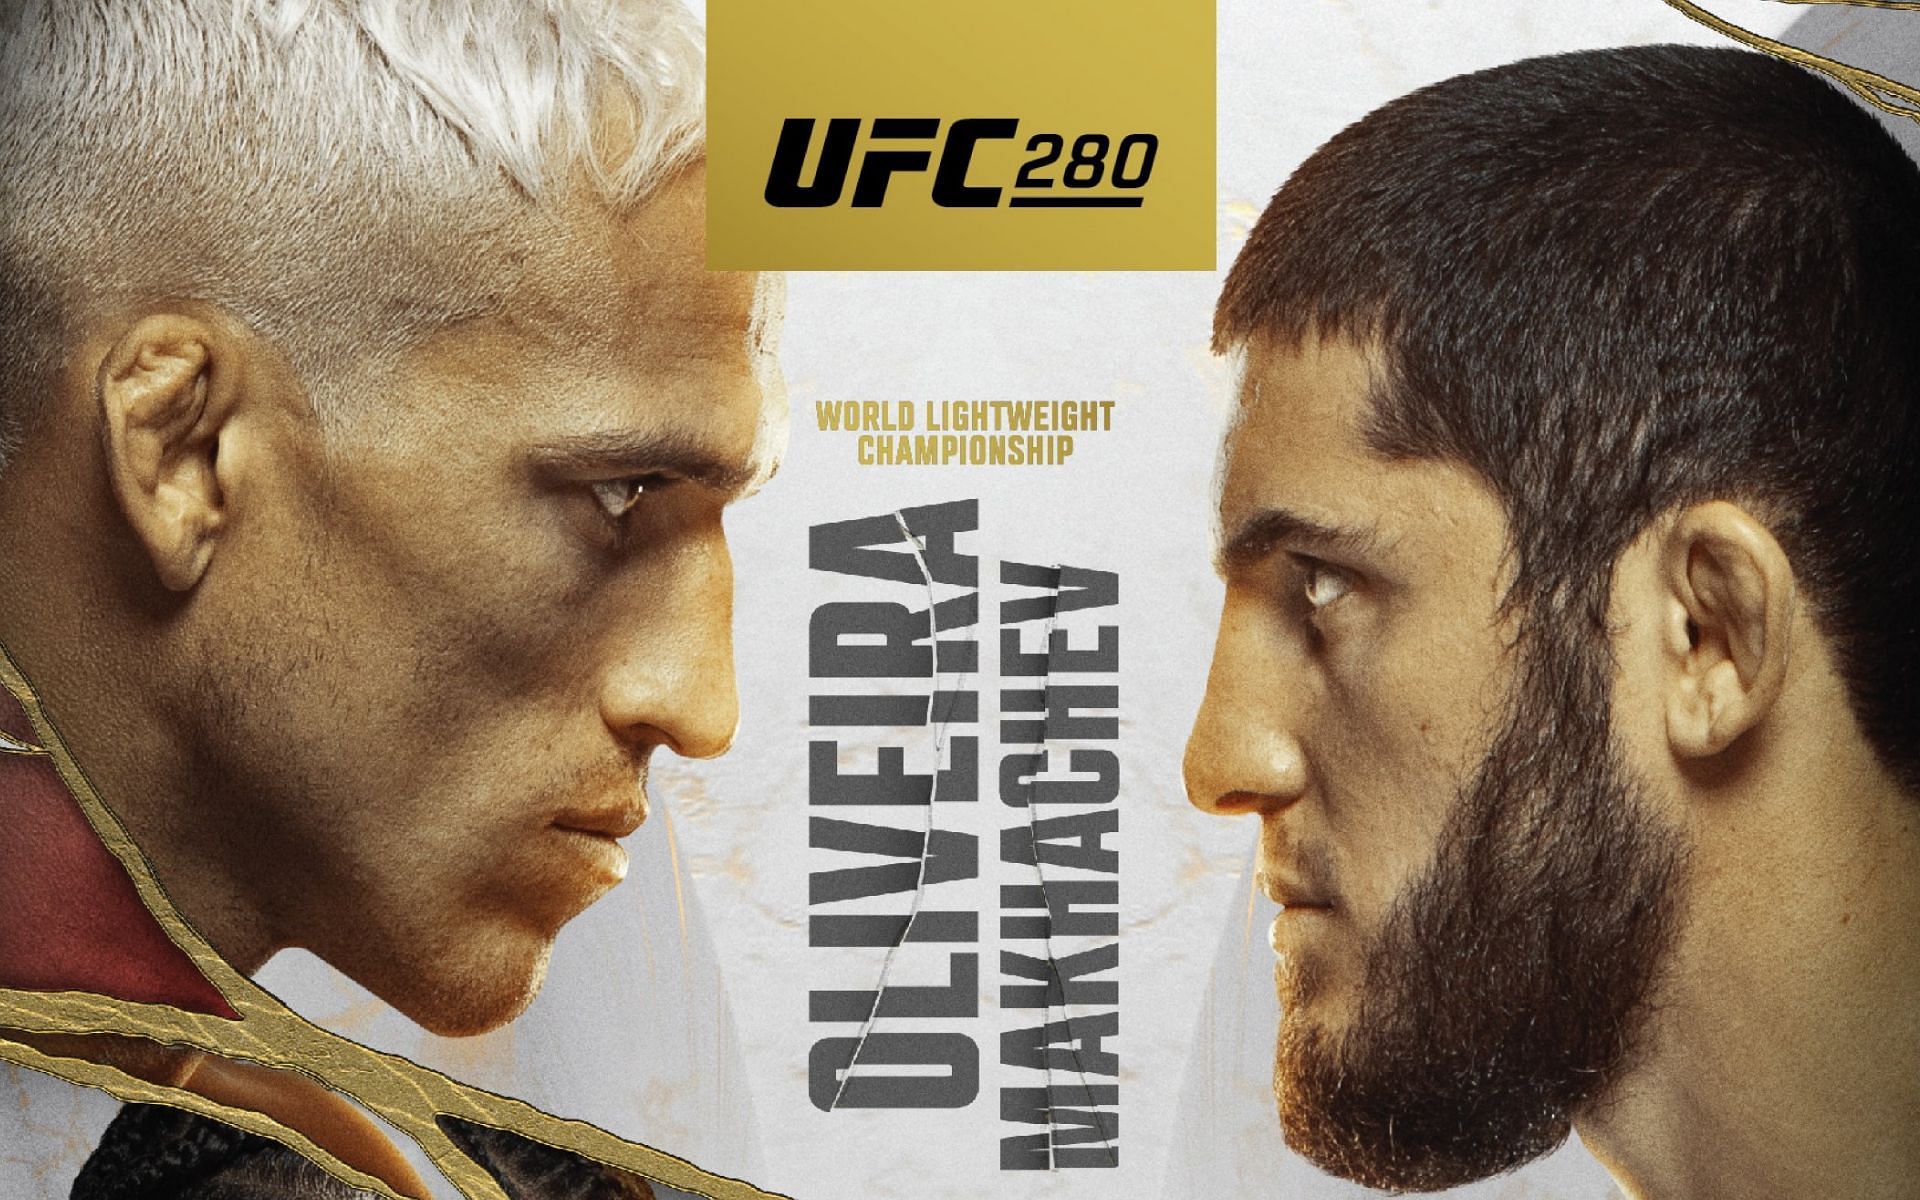 Charles Oliveira (left) and Islam Makhachev (right) on the official UFC 280 poster. [via UFC]